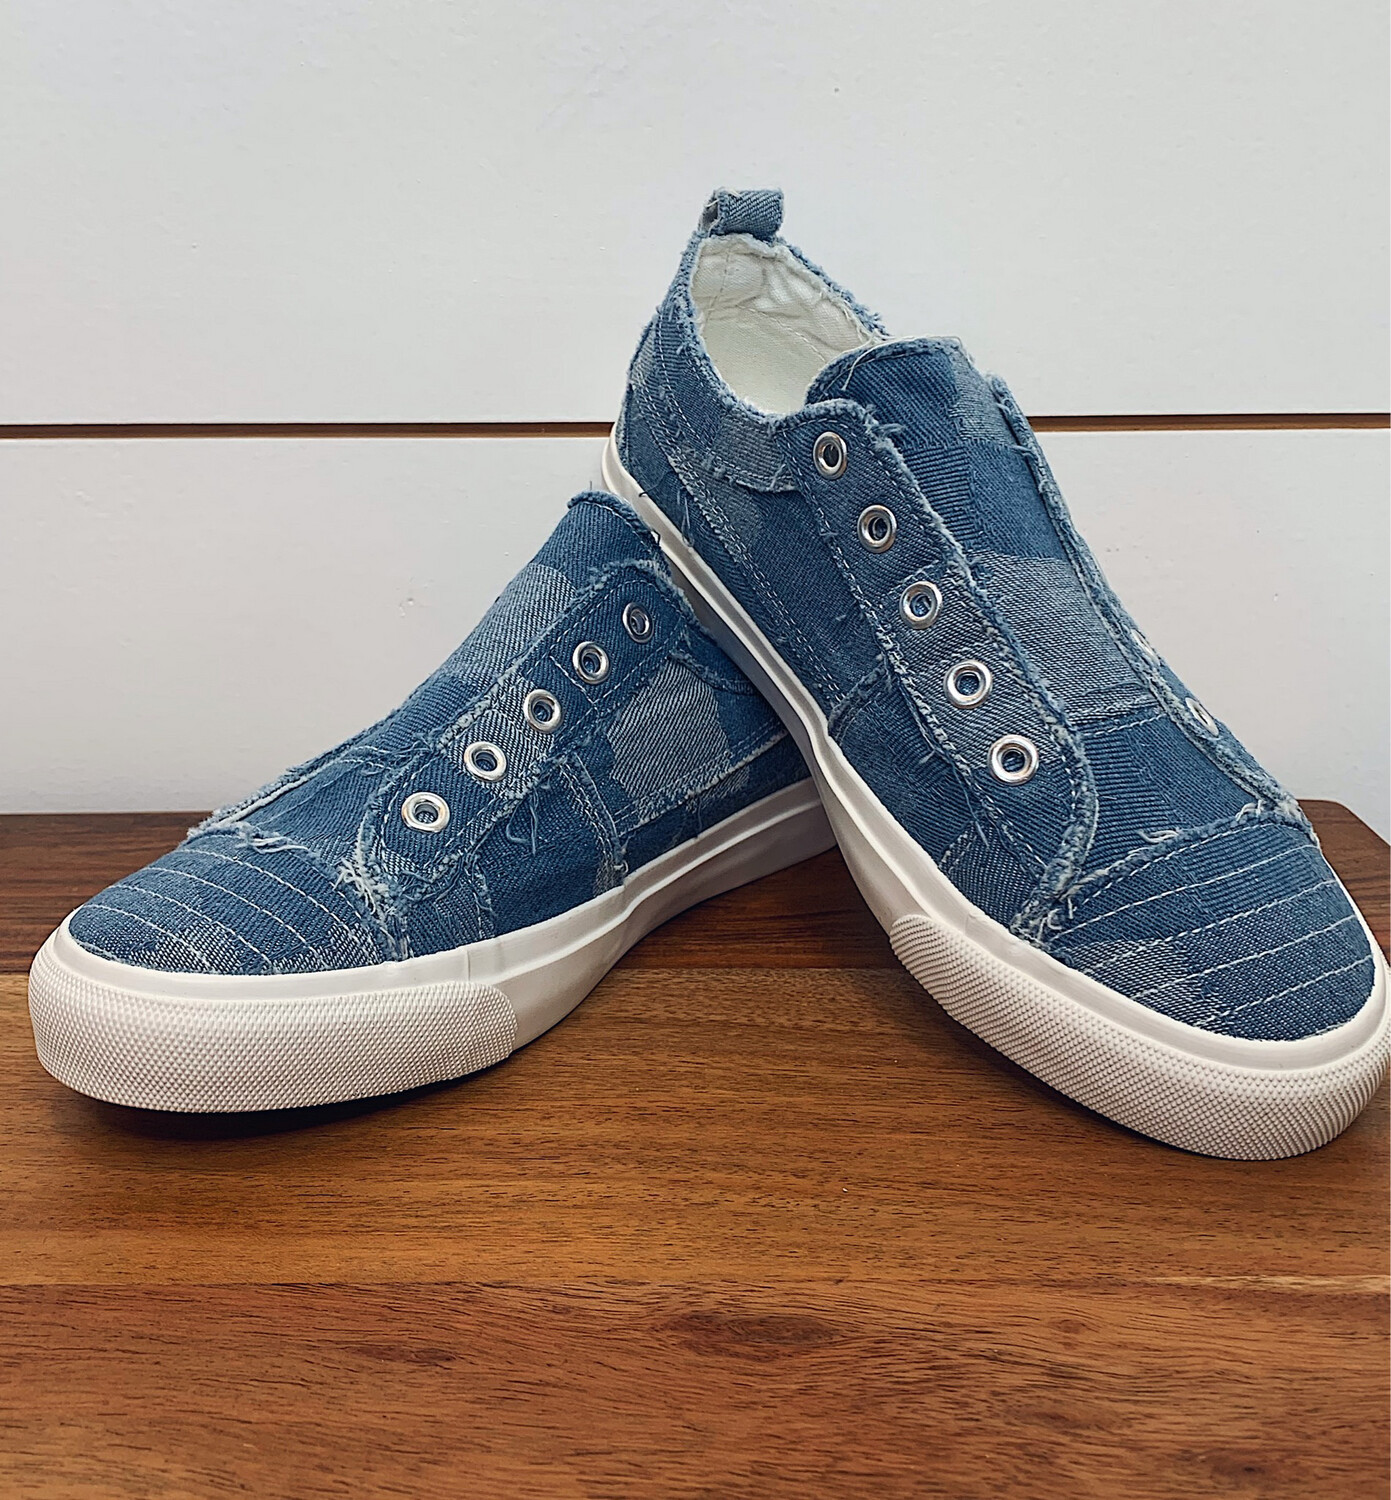 Denim Patched Corky's Babalu Sneakers